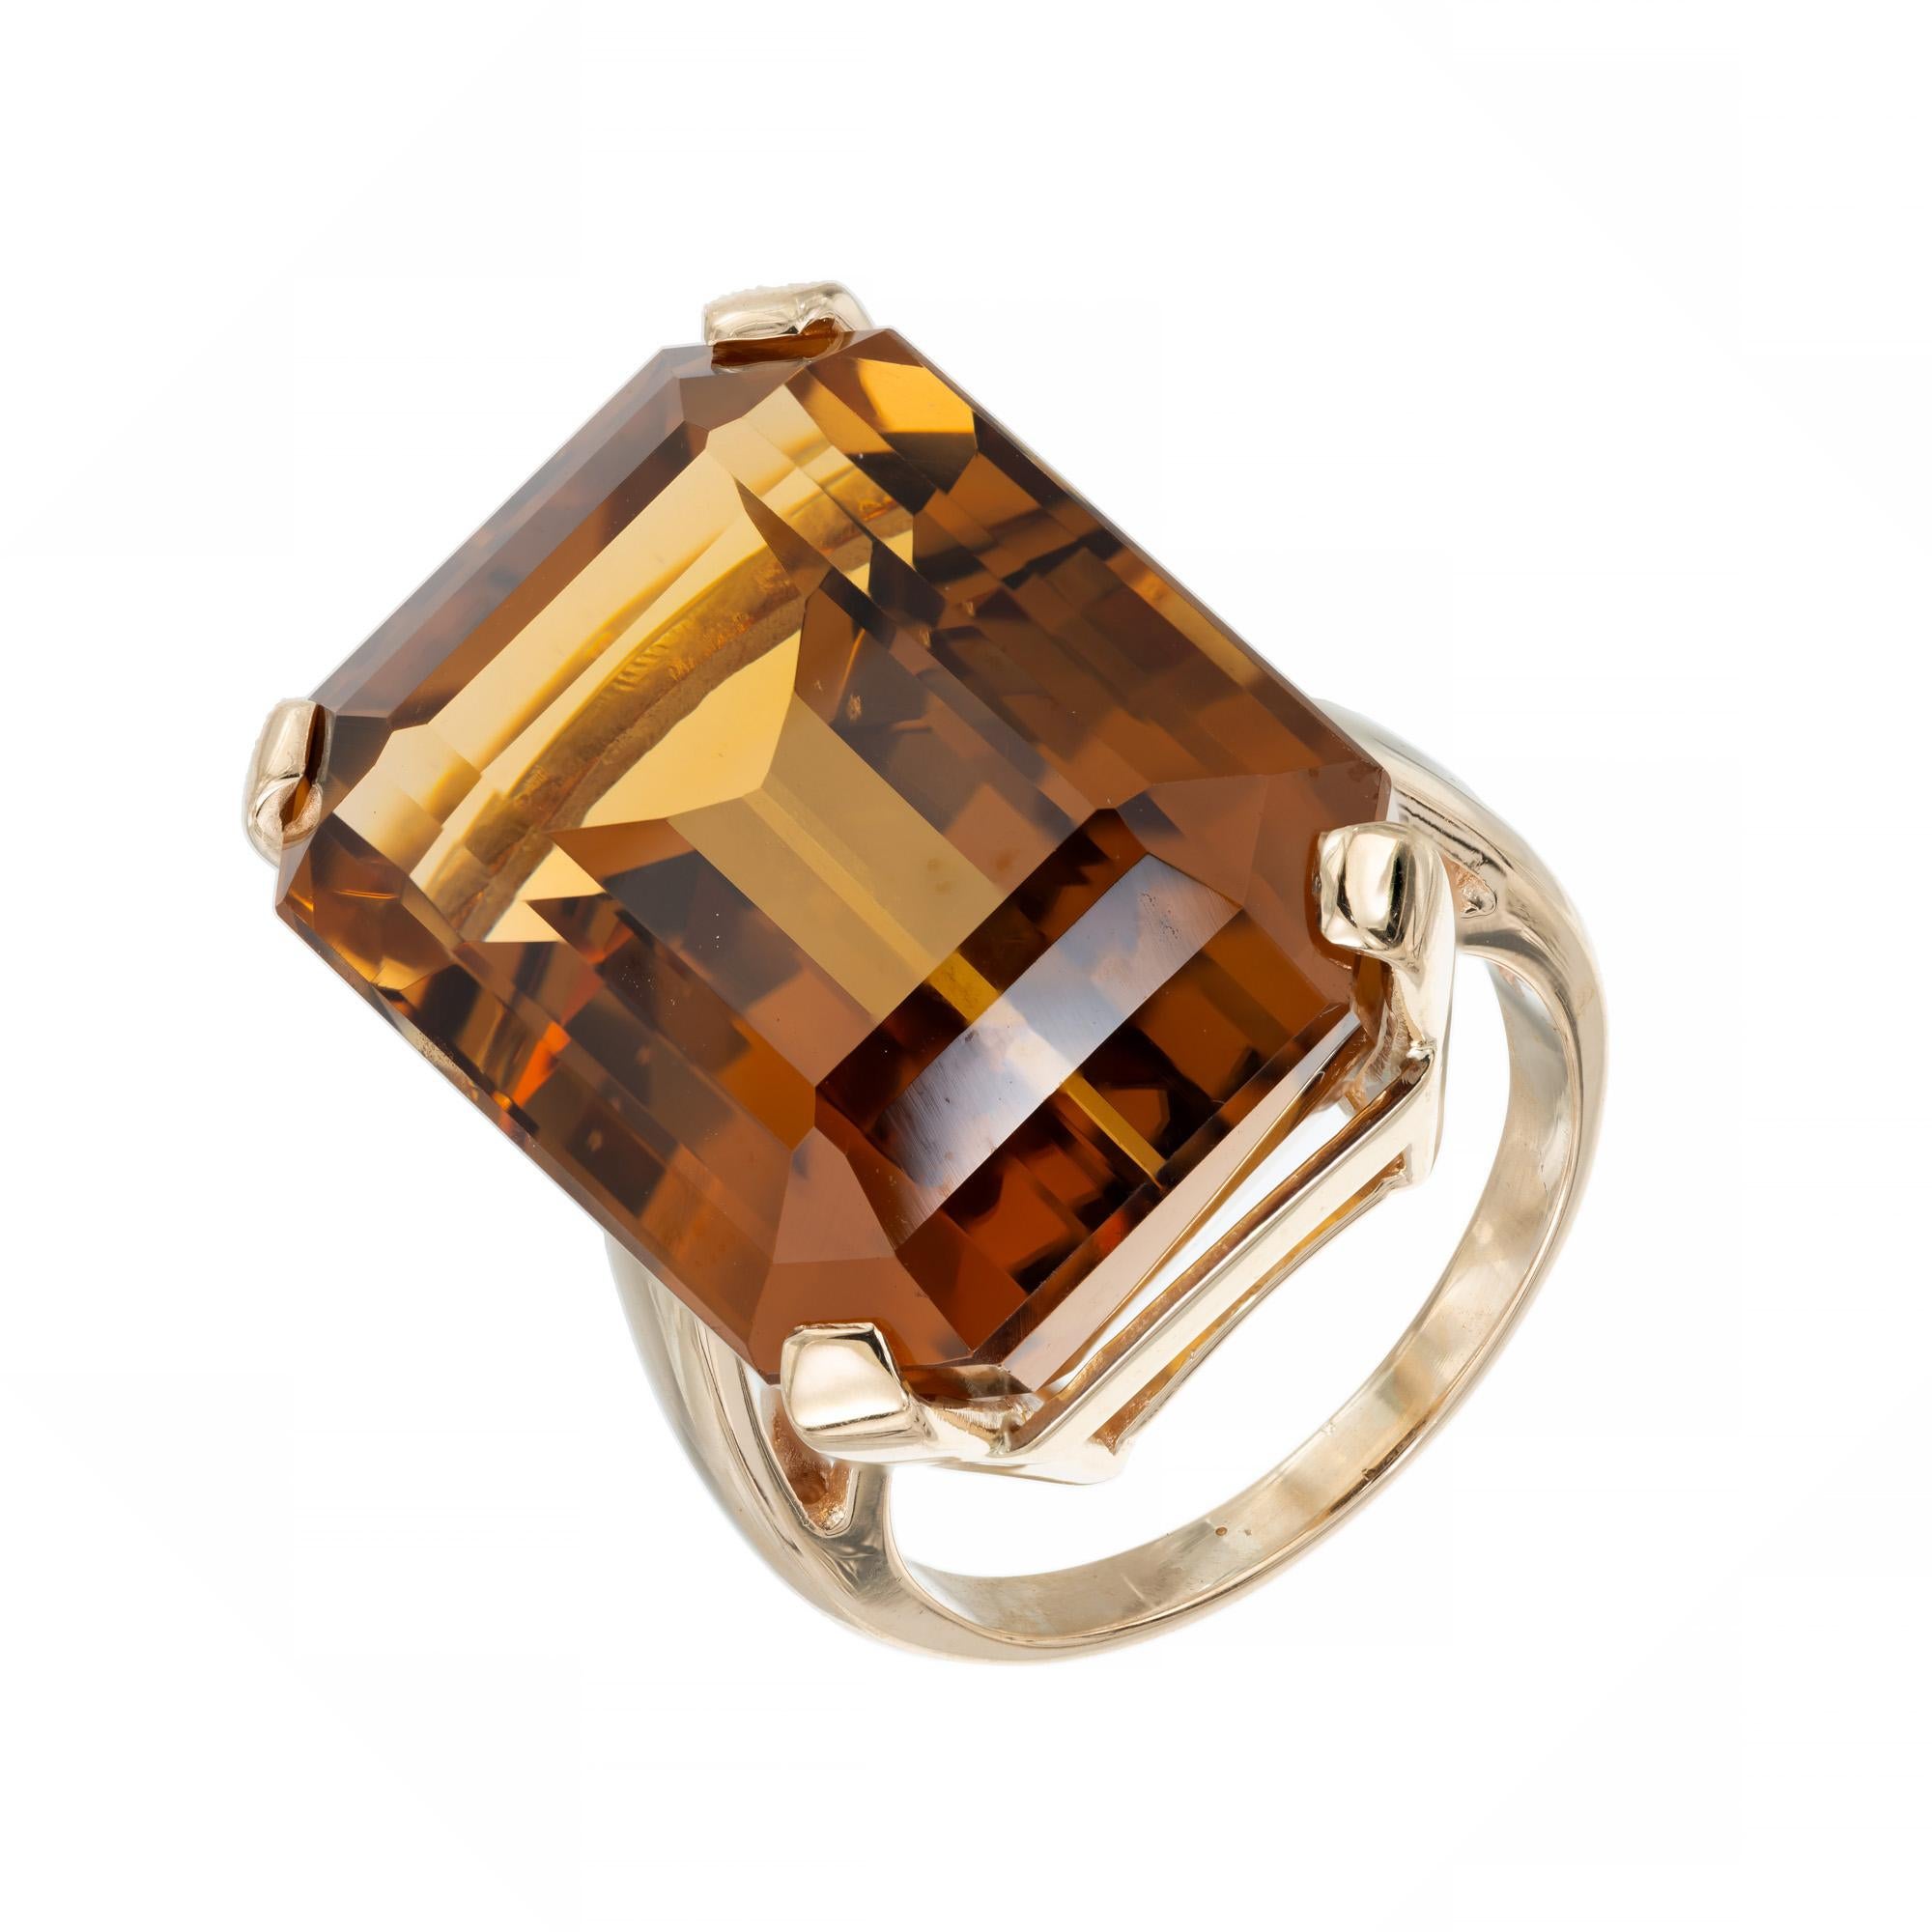 Vintage 1960's burnt orange ( Madera ) color emerald cut citrine ring cocktail ring. Stunning 36.60 Carat Madera Emerald Cut Citrine set in a 14k yellow gold setting. The citrine color is vibrant and rich with yellow and orange hues. 
The Madera